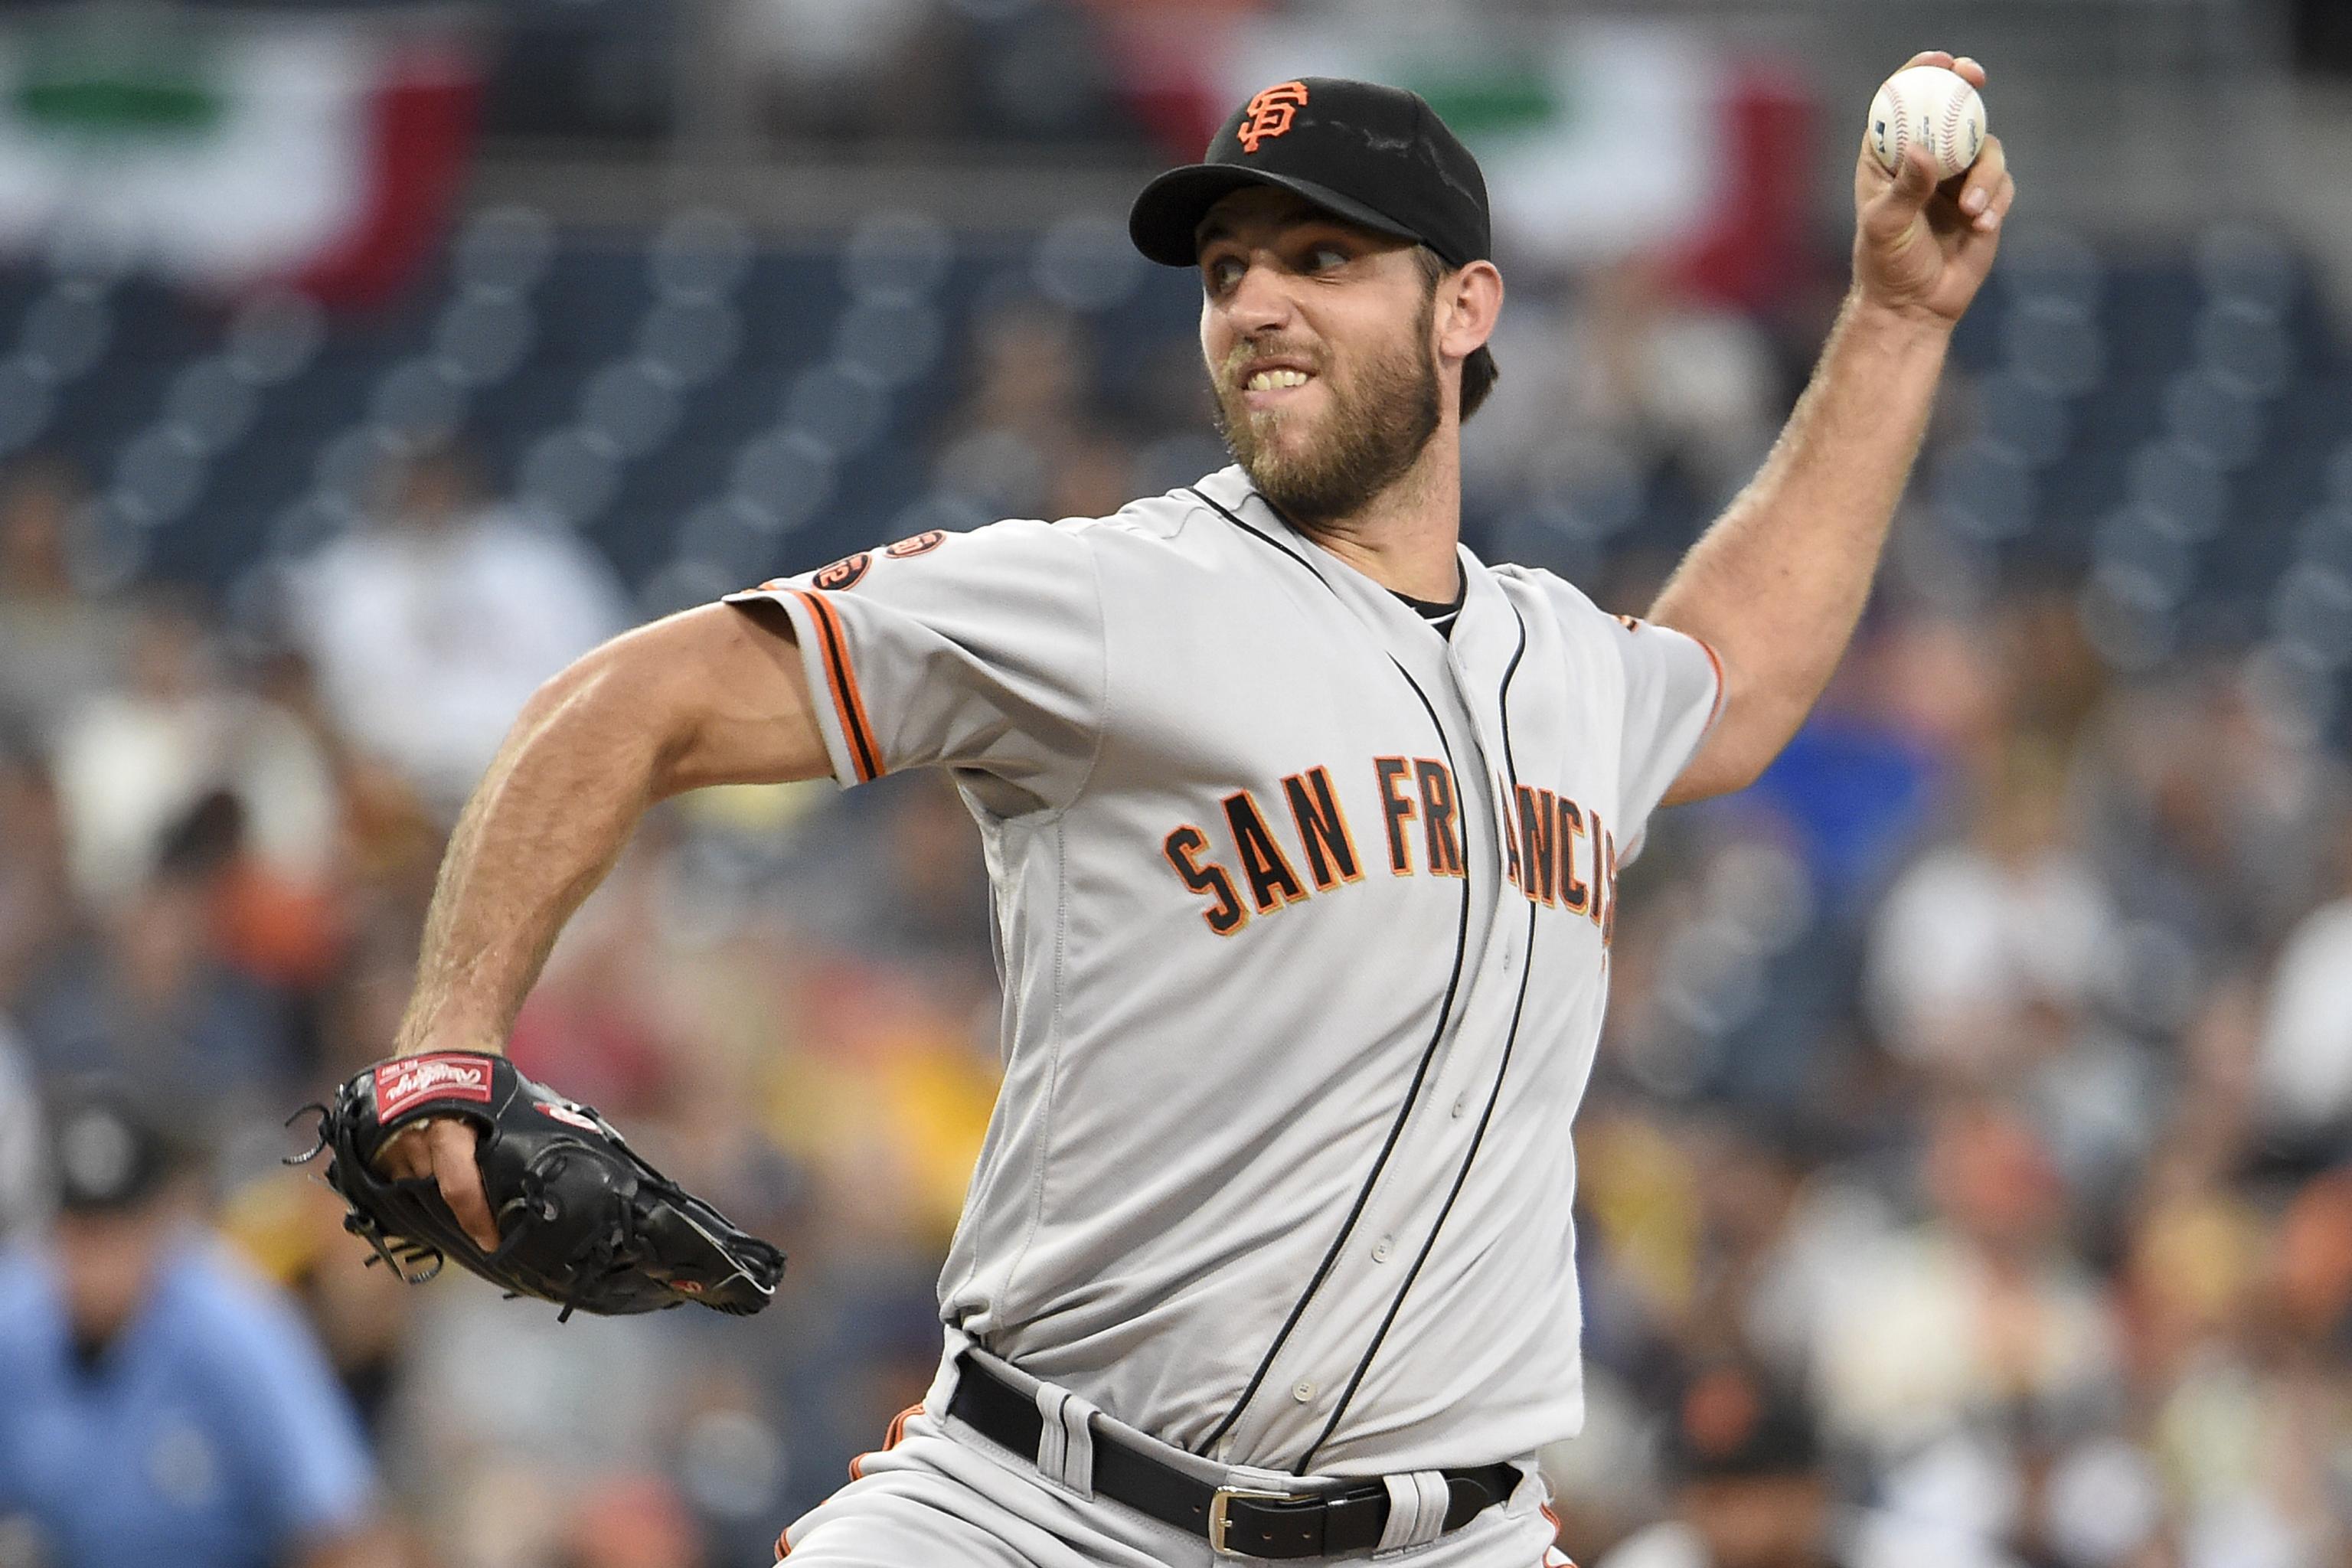 Top stats to know: 1st matchup of Madison Bumgarner & Noah